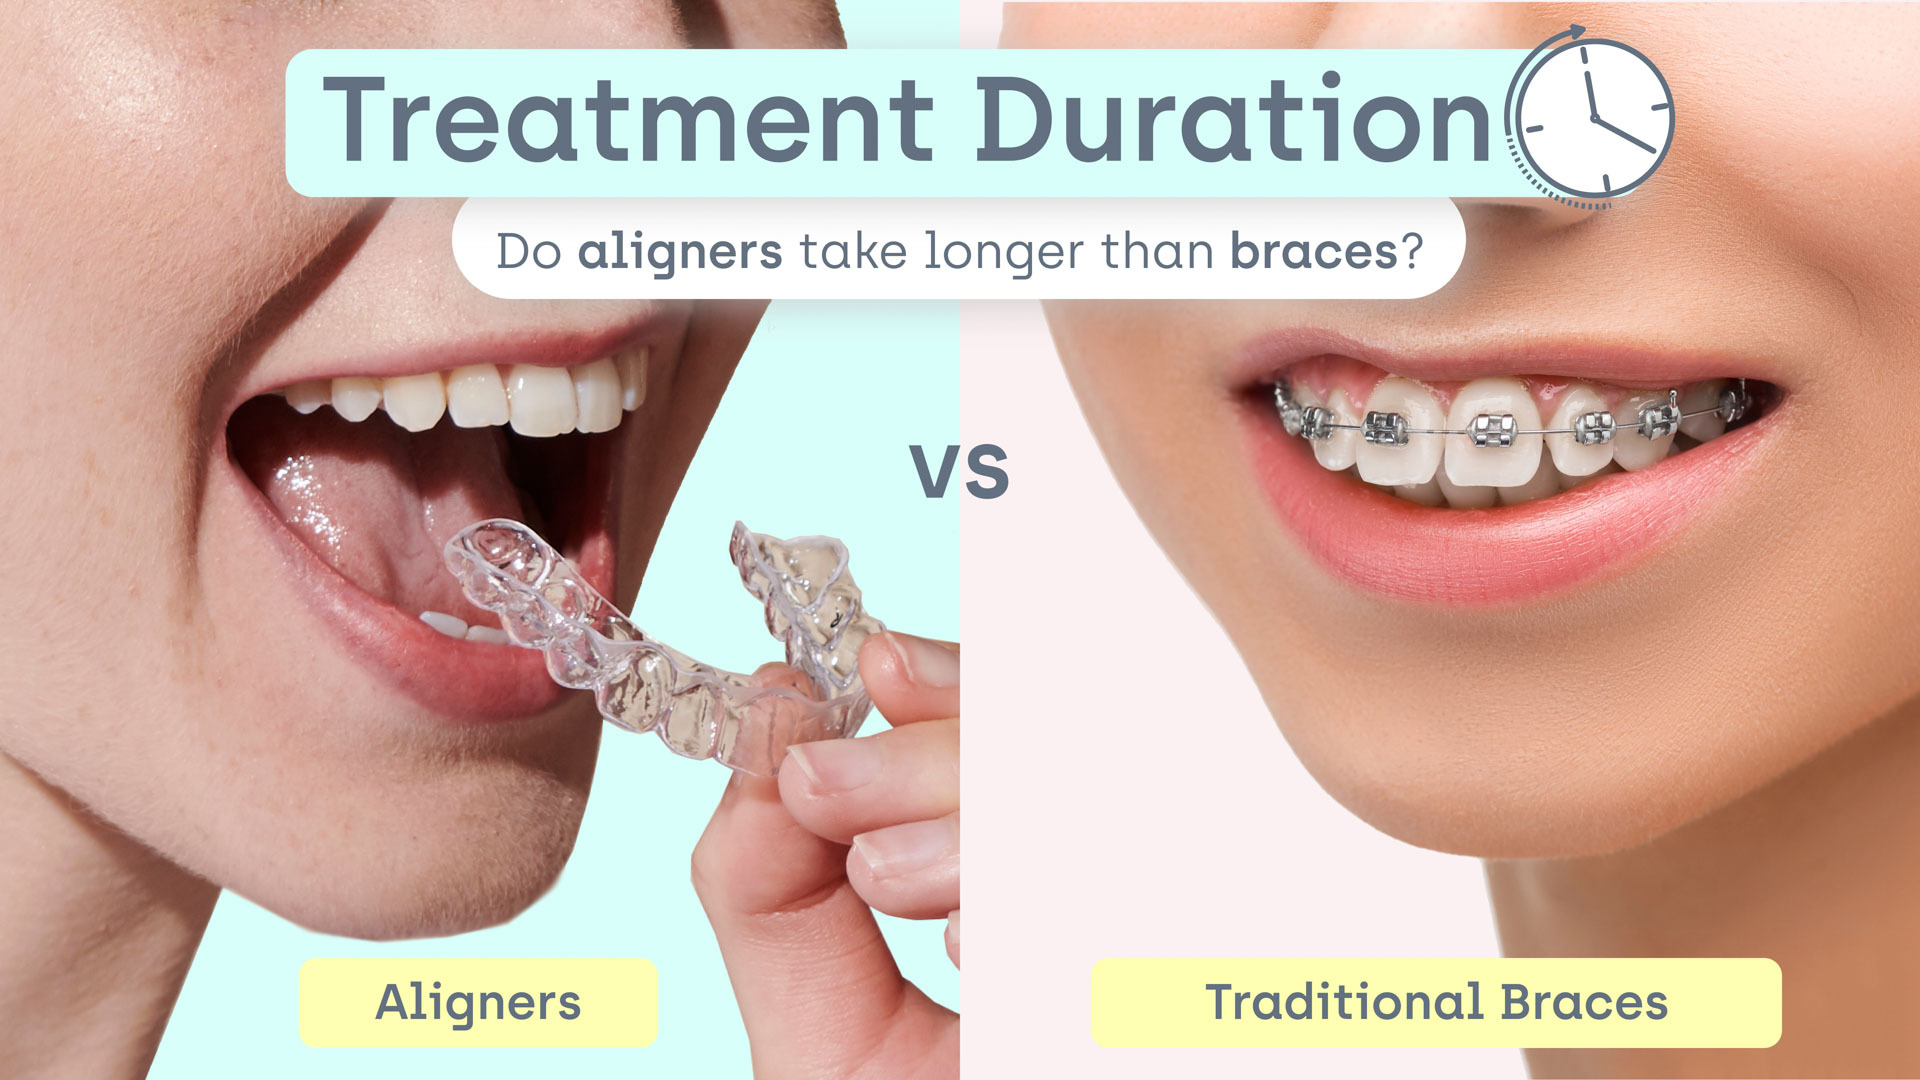 how long to braces take vs aligners